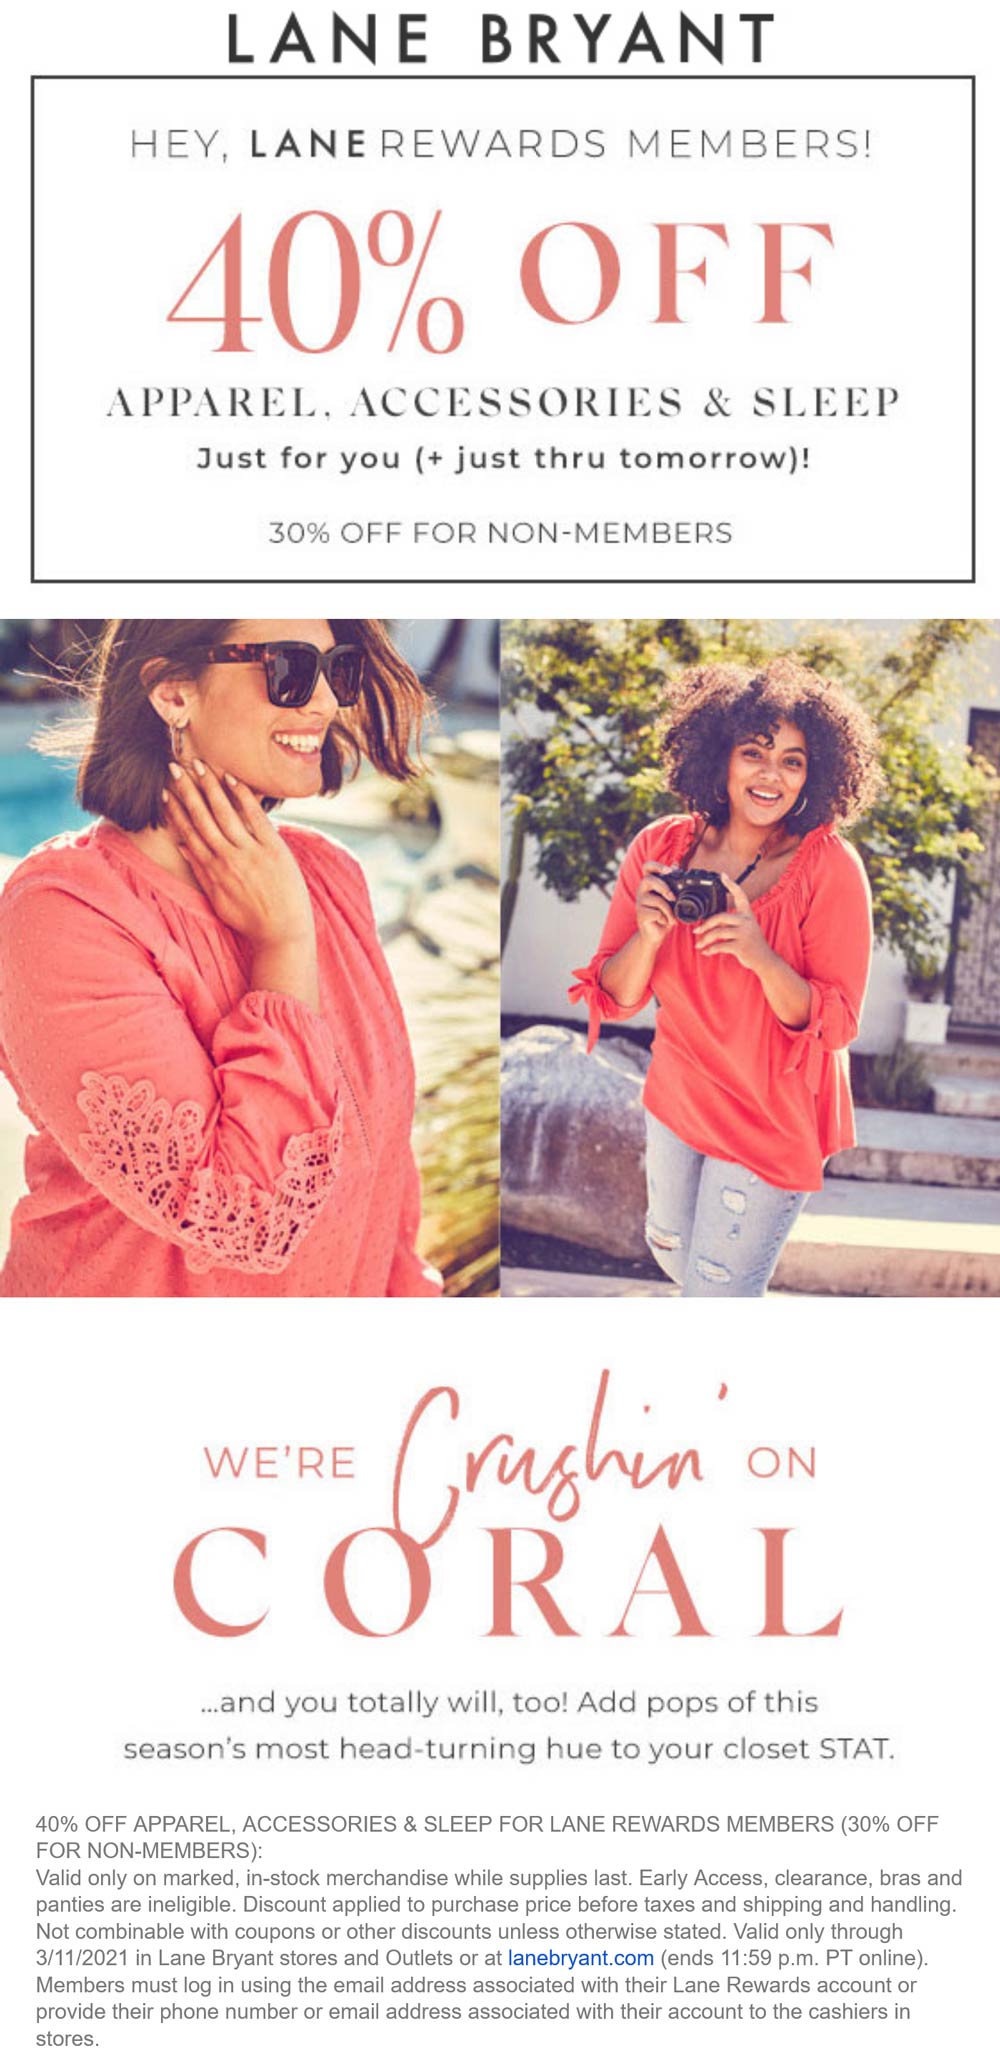 Lane Bryant stores Coupon  30-40% off at Lane Bryant & outlets, ditto online #lanebryant 